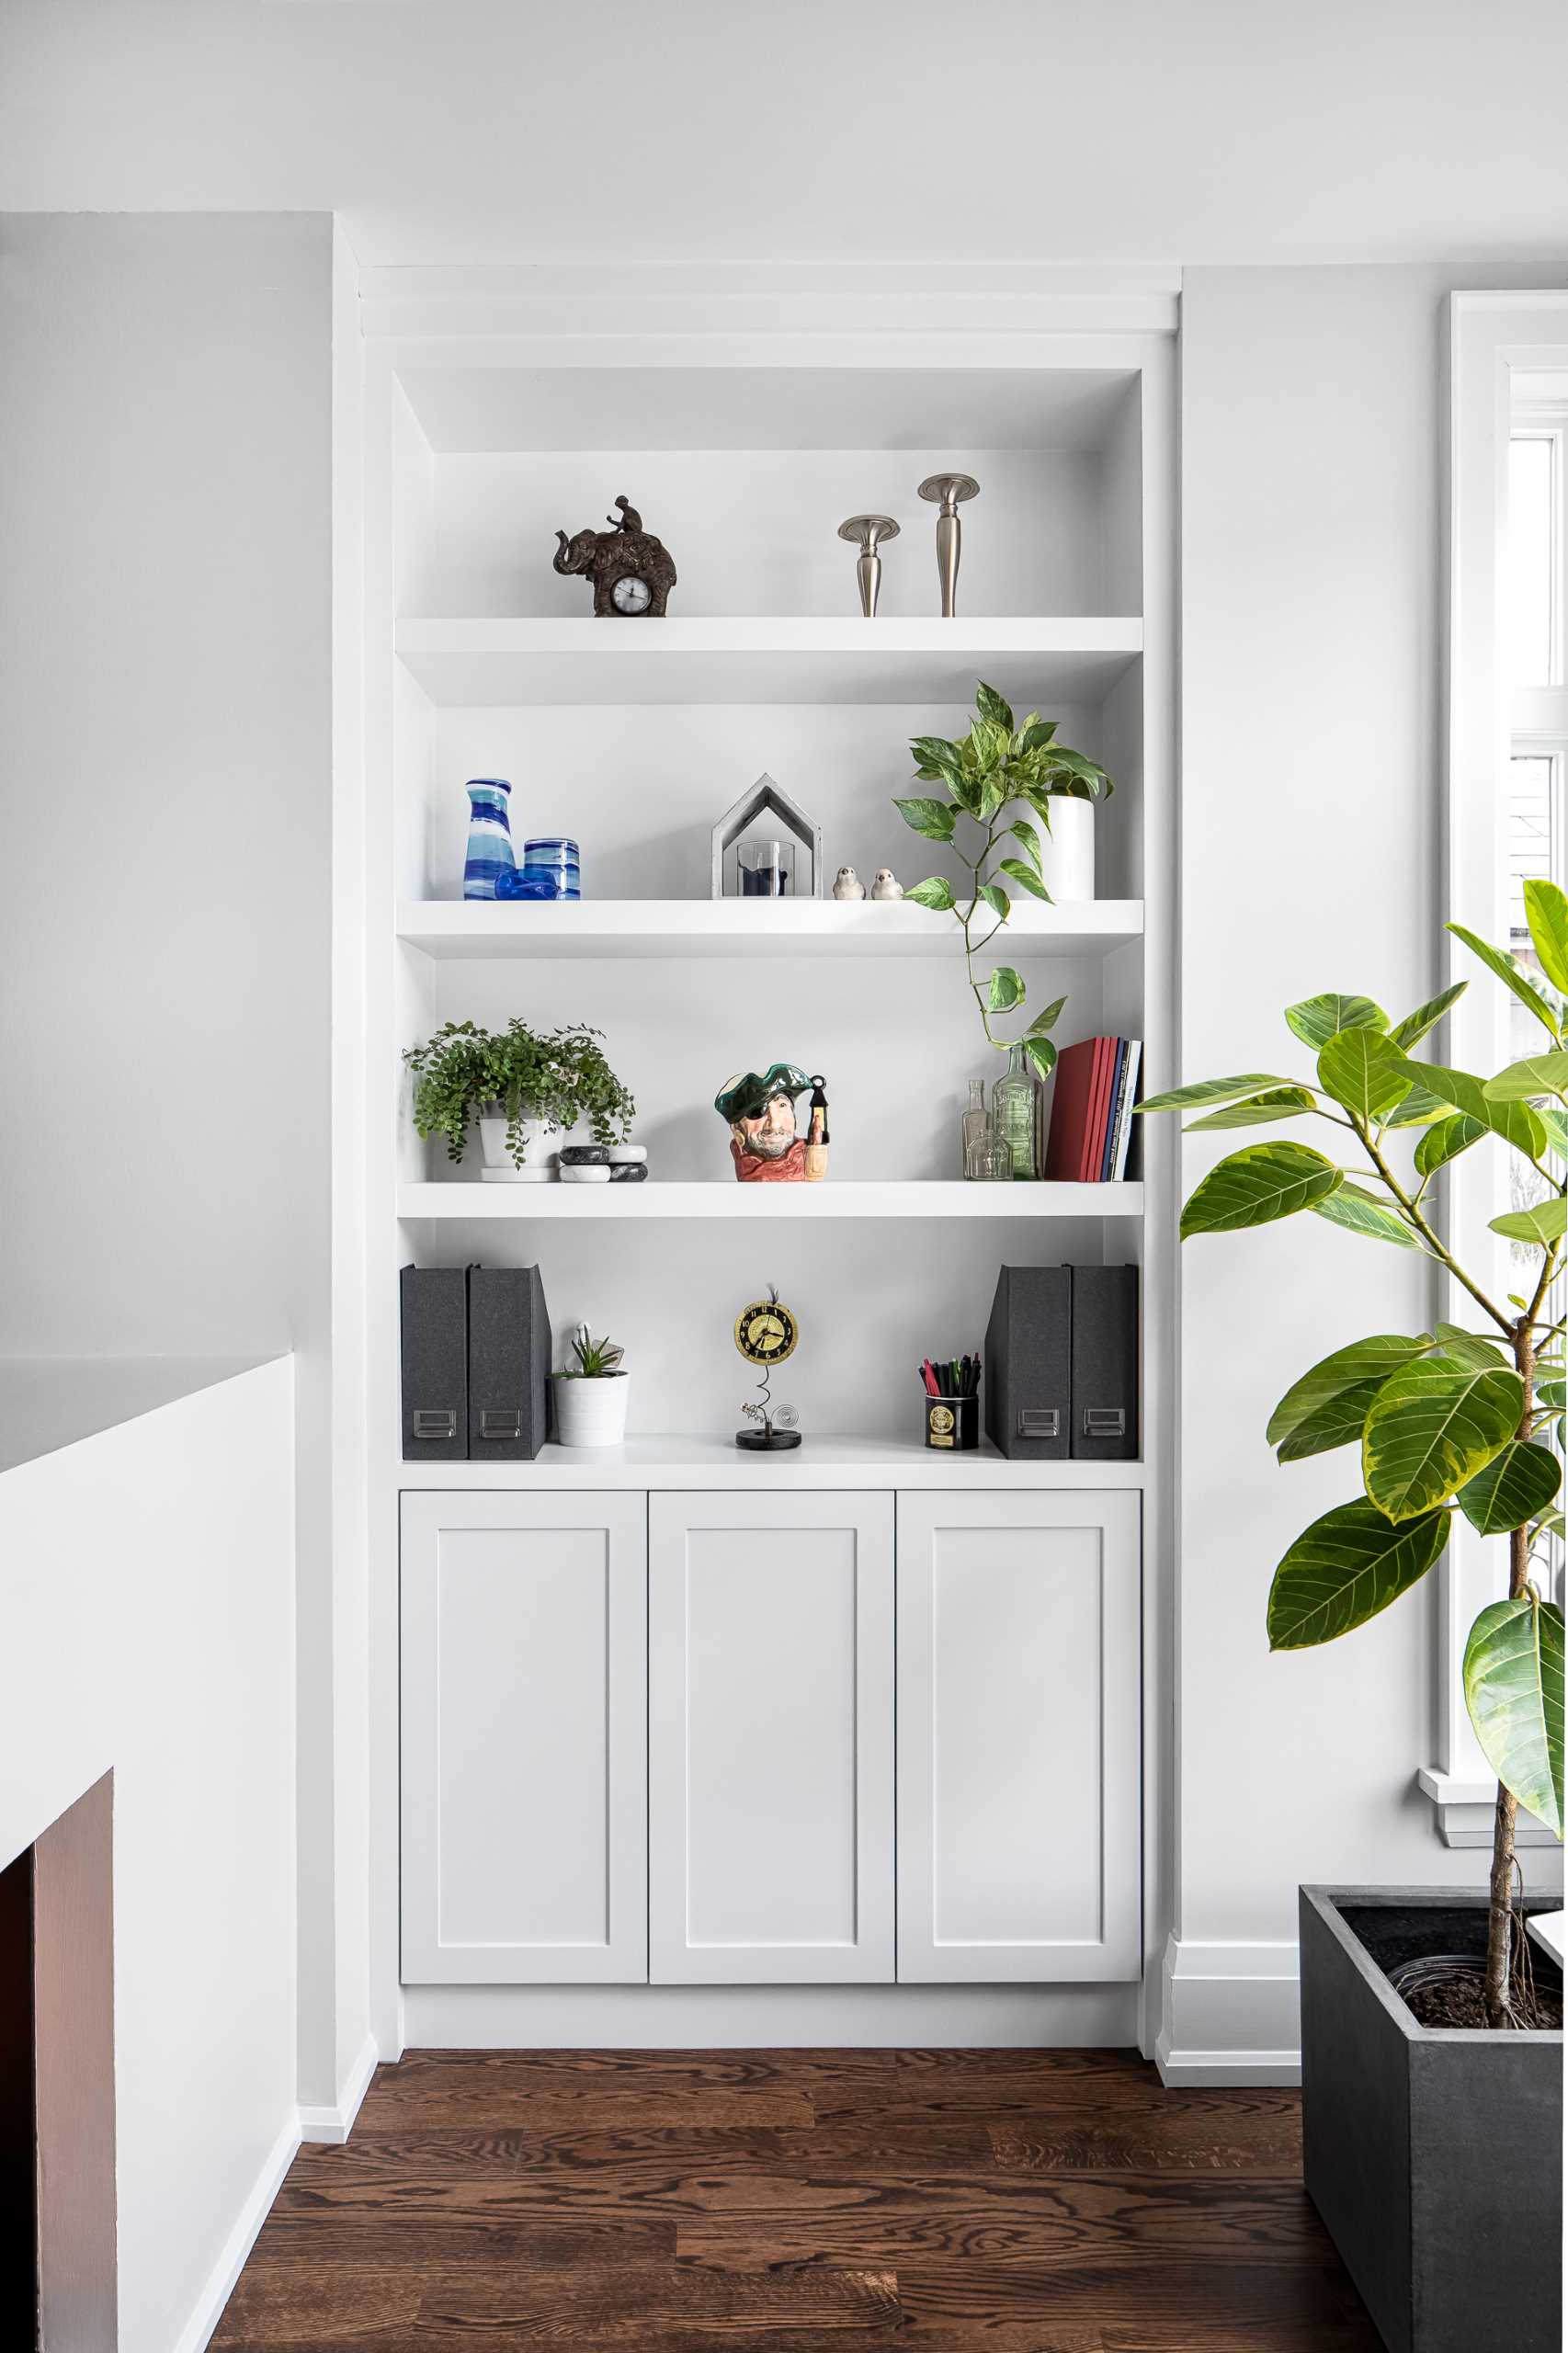 Custom design shelving niche and cabinetry provides a place for office accessories and decor.